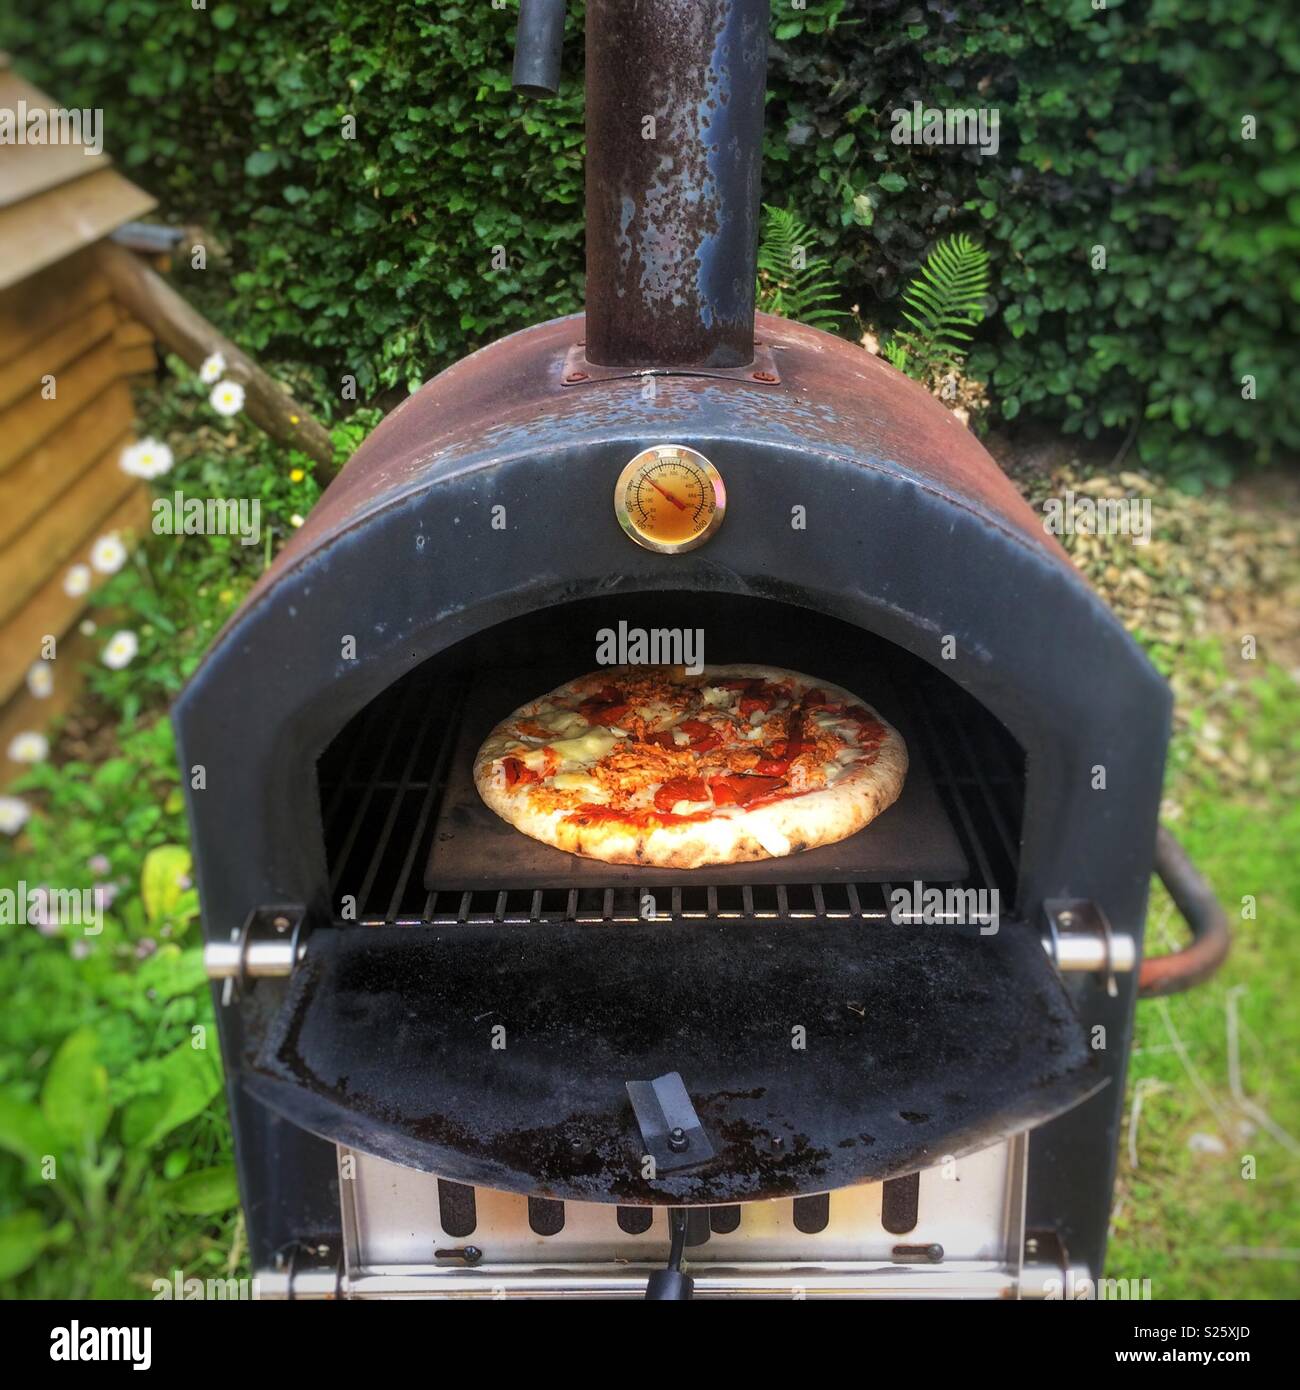 https://c8.alamy.com/comp/S25XJD/wood-fired-pizza-oven-outside-in-a-garden-hampshire-england-united-kingdom-S25XJD.jpg